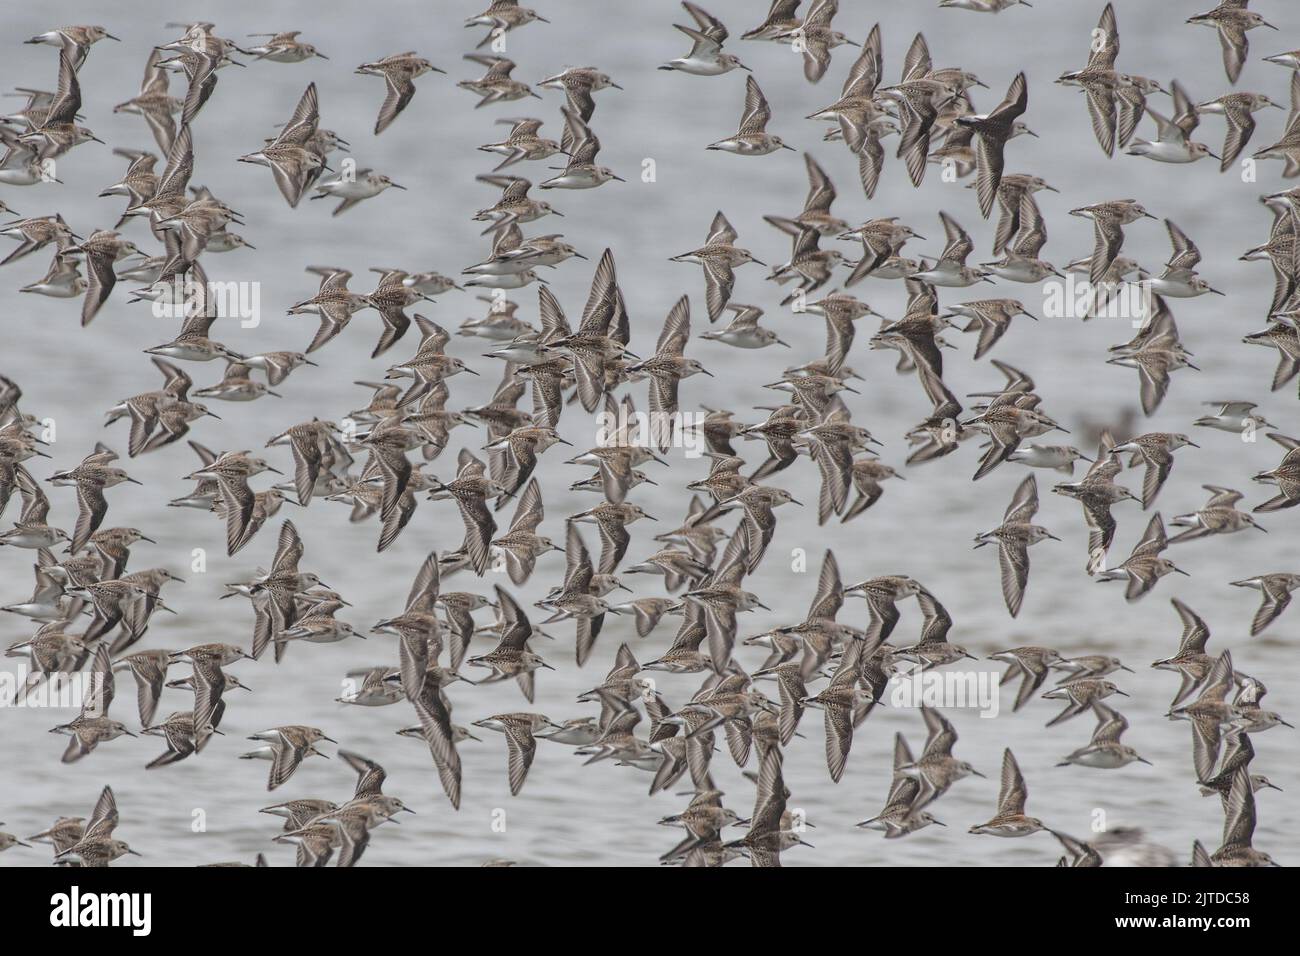 A flock of least sandpipers (Calidris minutilla) in flight in Point Reyes National seashore in California, the birds are flocking in large groups. Stock Photo